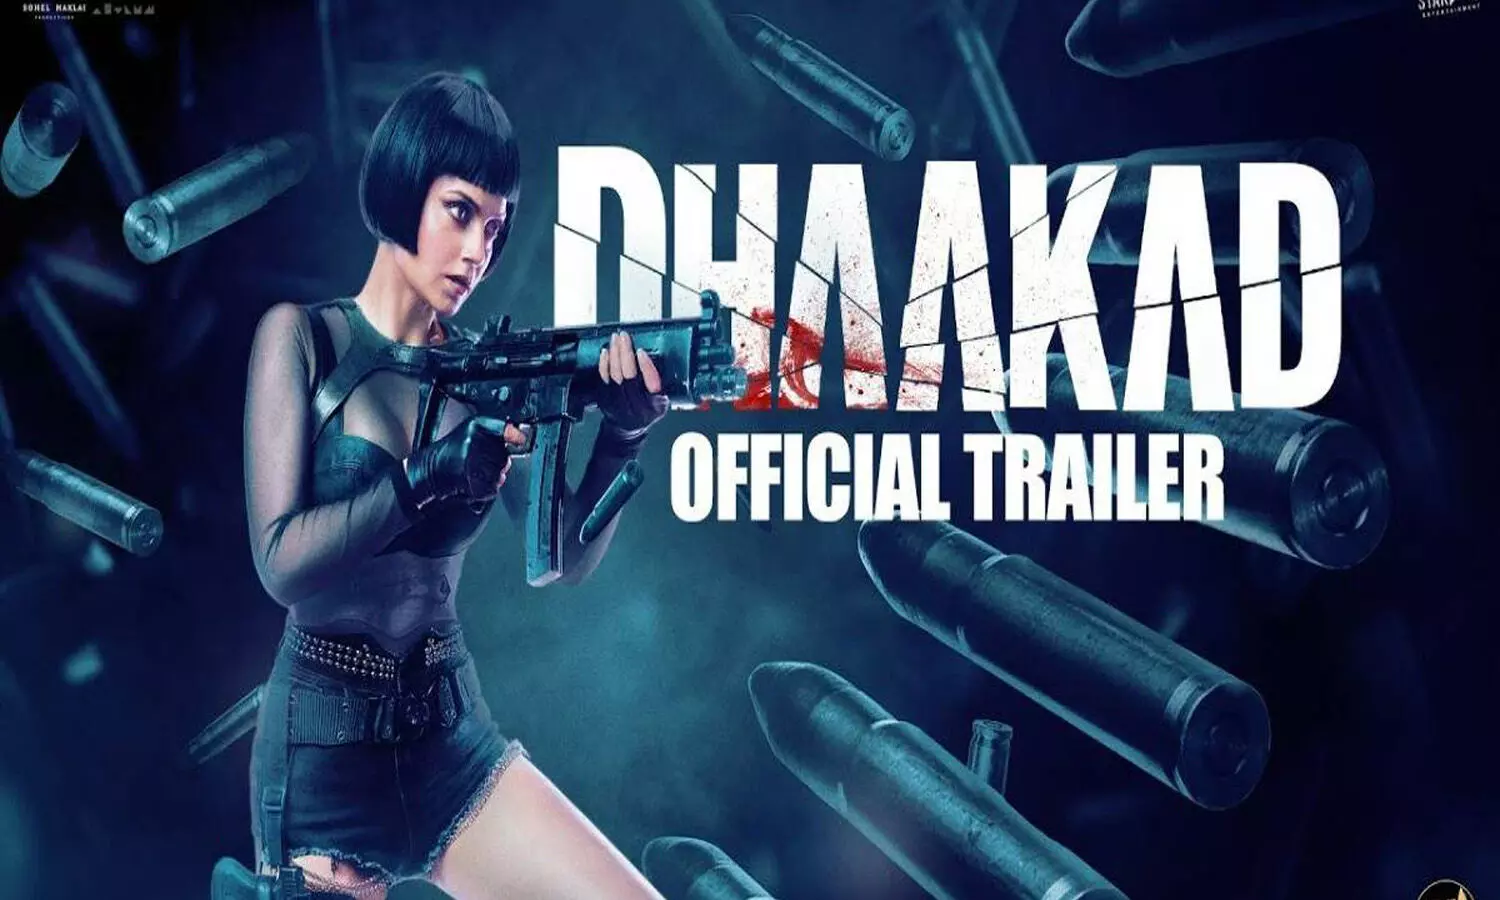 Dhaakad trailer: Kangana Ranaut as Agent Agni; heavy action & memorable dialogues steal the show